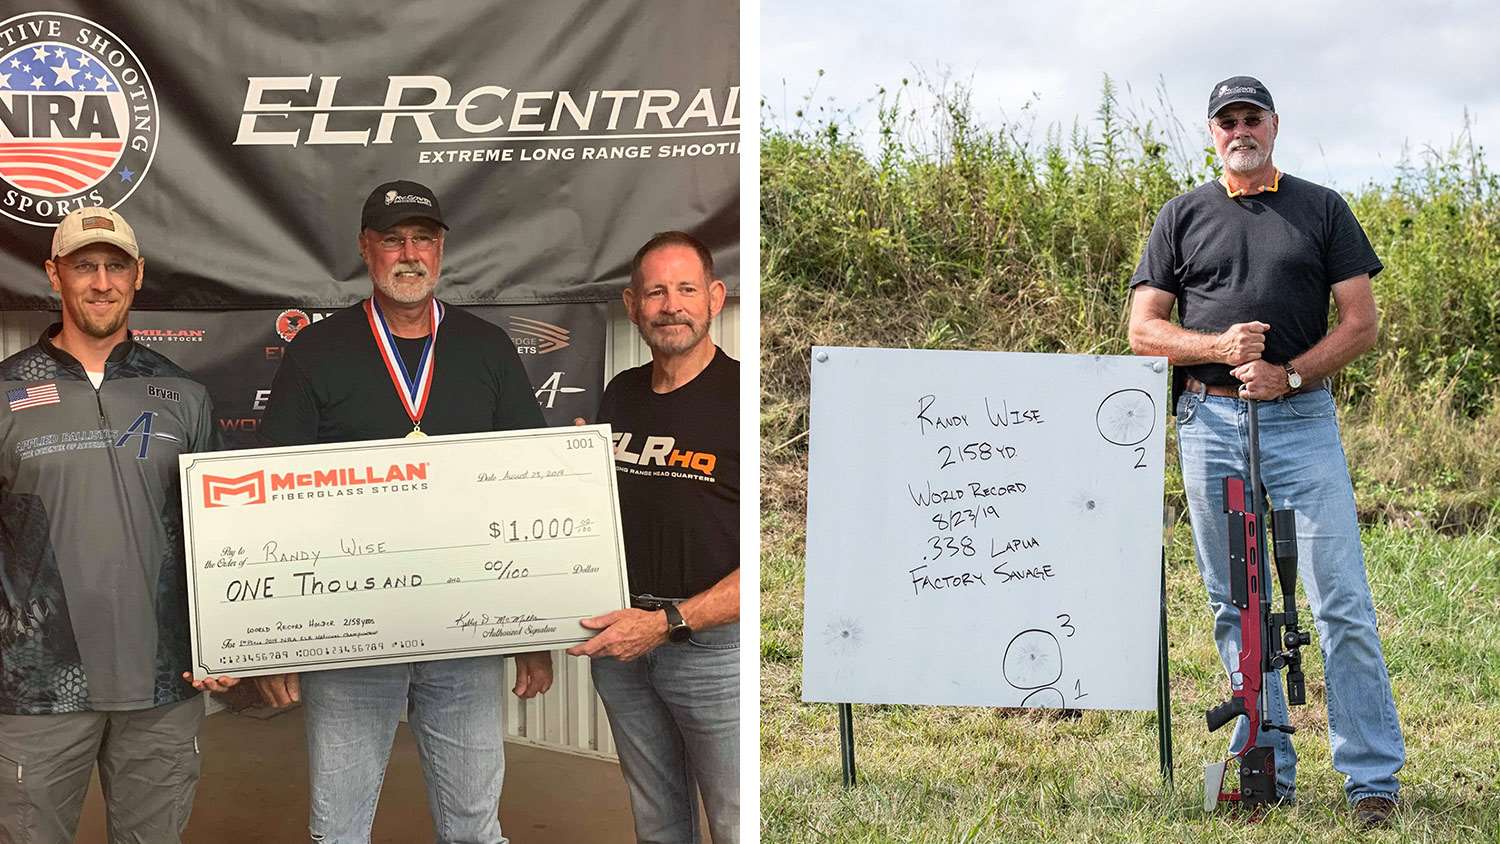 Randy Wise sets ELR Central World Record At 2019 NRA Extreme Long-Range Nationals at Camp Atterbury in Indiana